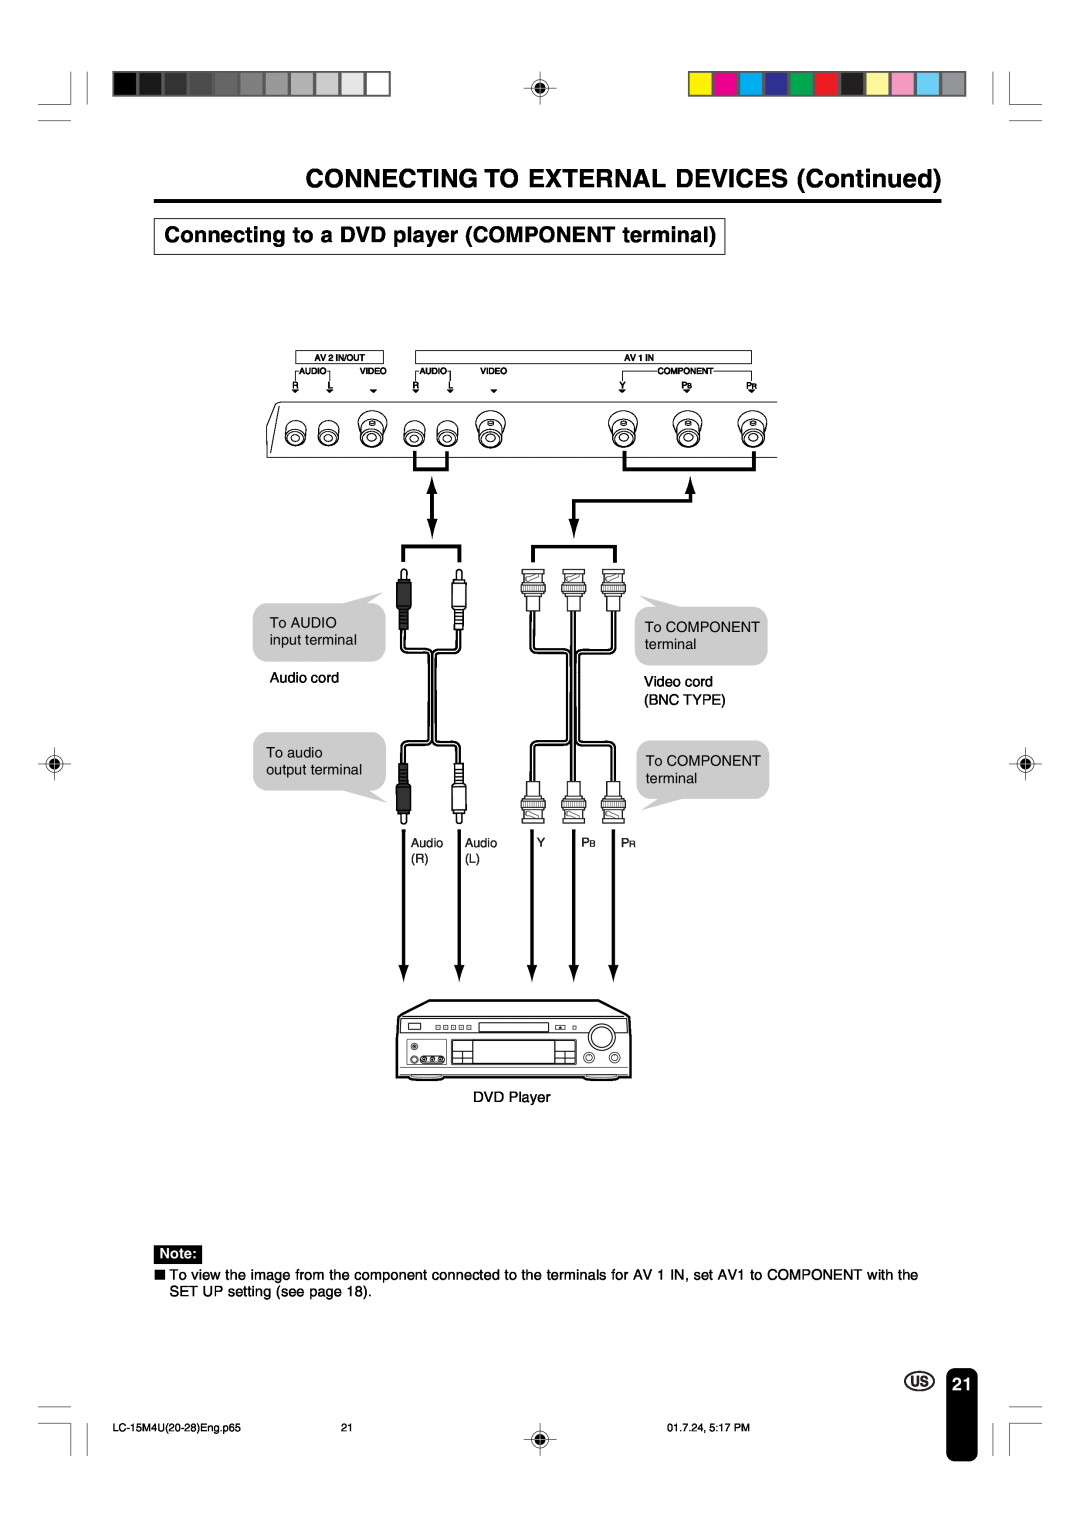 Sharp LC-15M4U operation manual CONNECTING TO EXTERNAL DEVICES Continued, Connecting to a DVD player COMPONENT terminal 